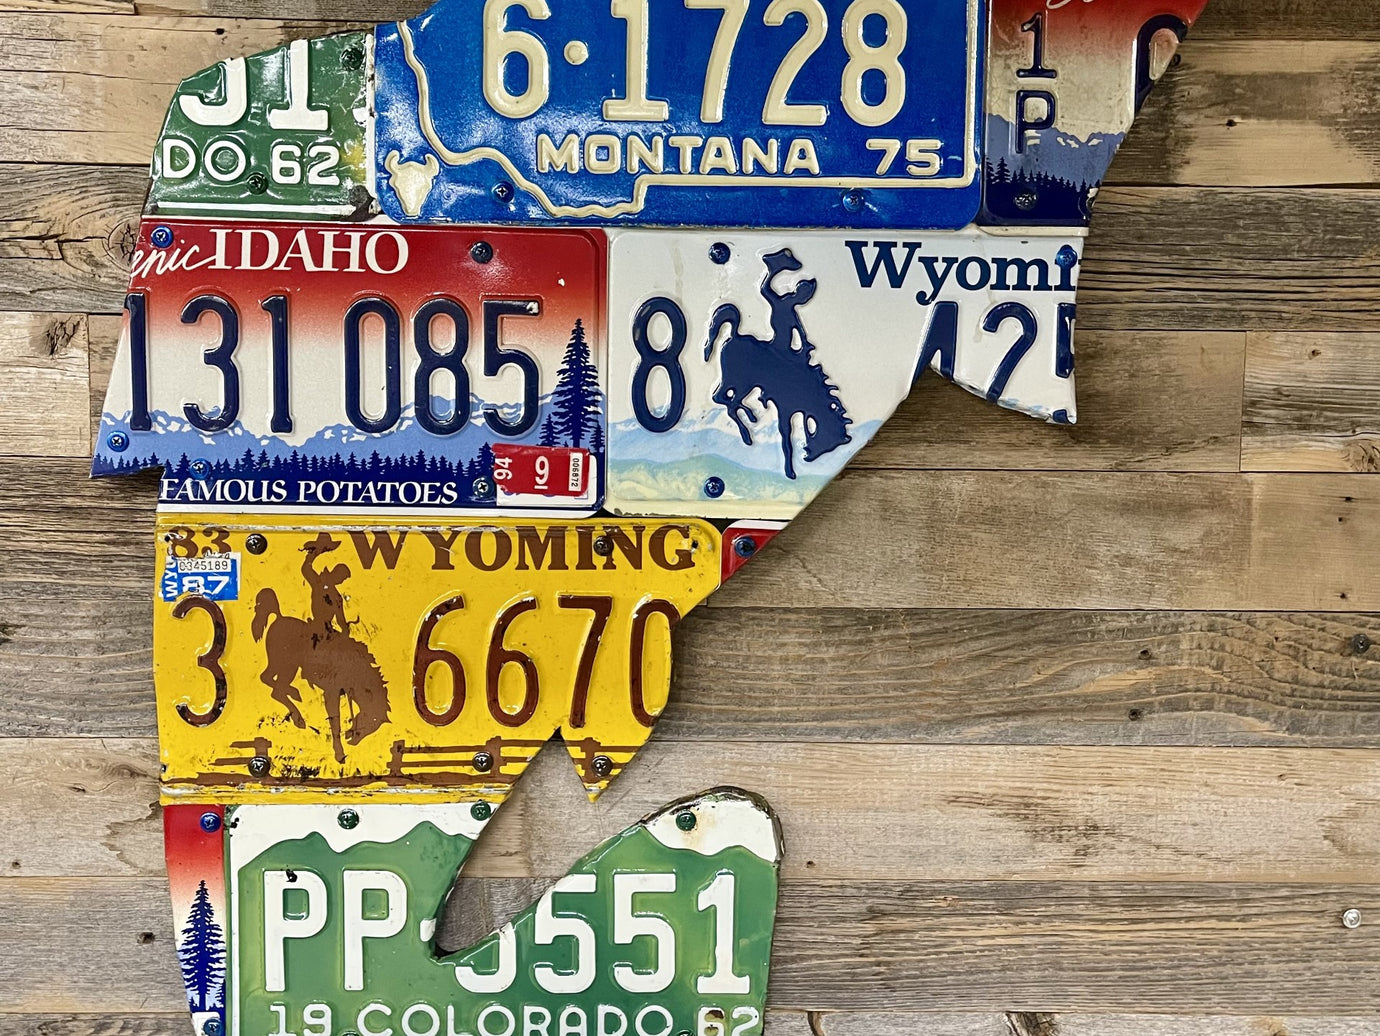 Trout Unlimited - Artist Series License Plate Art